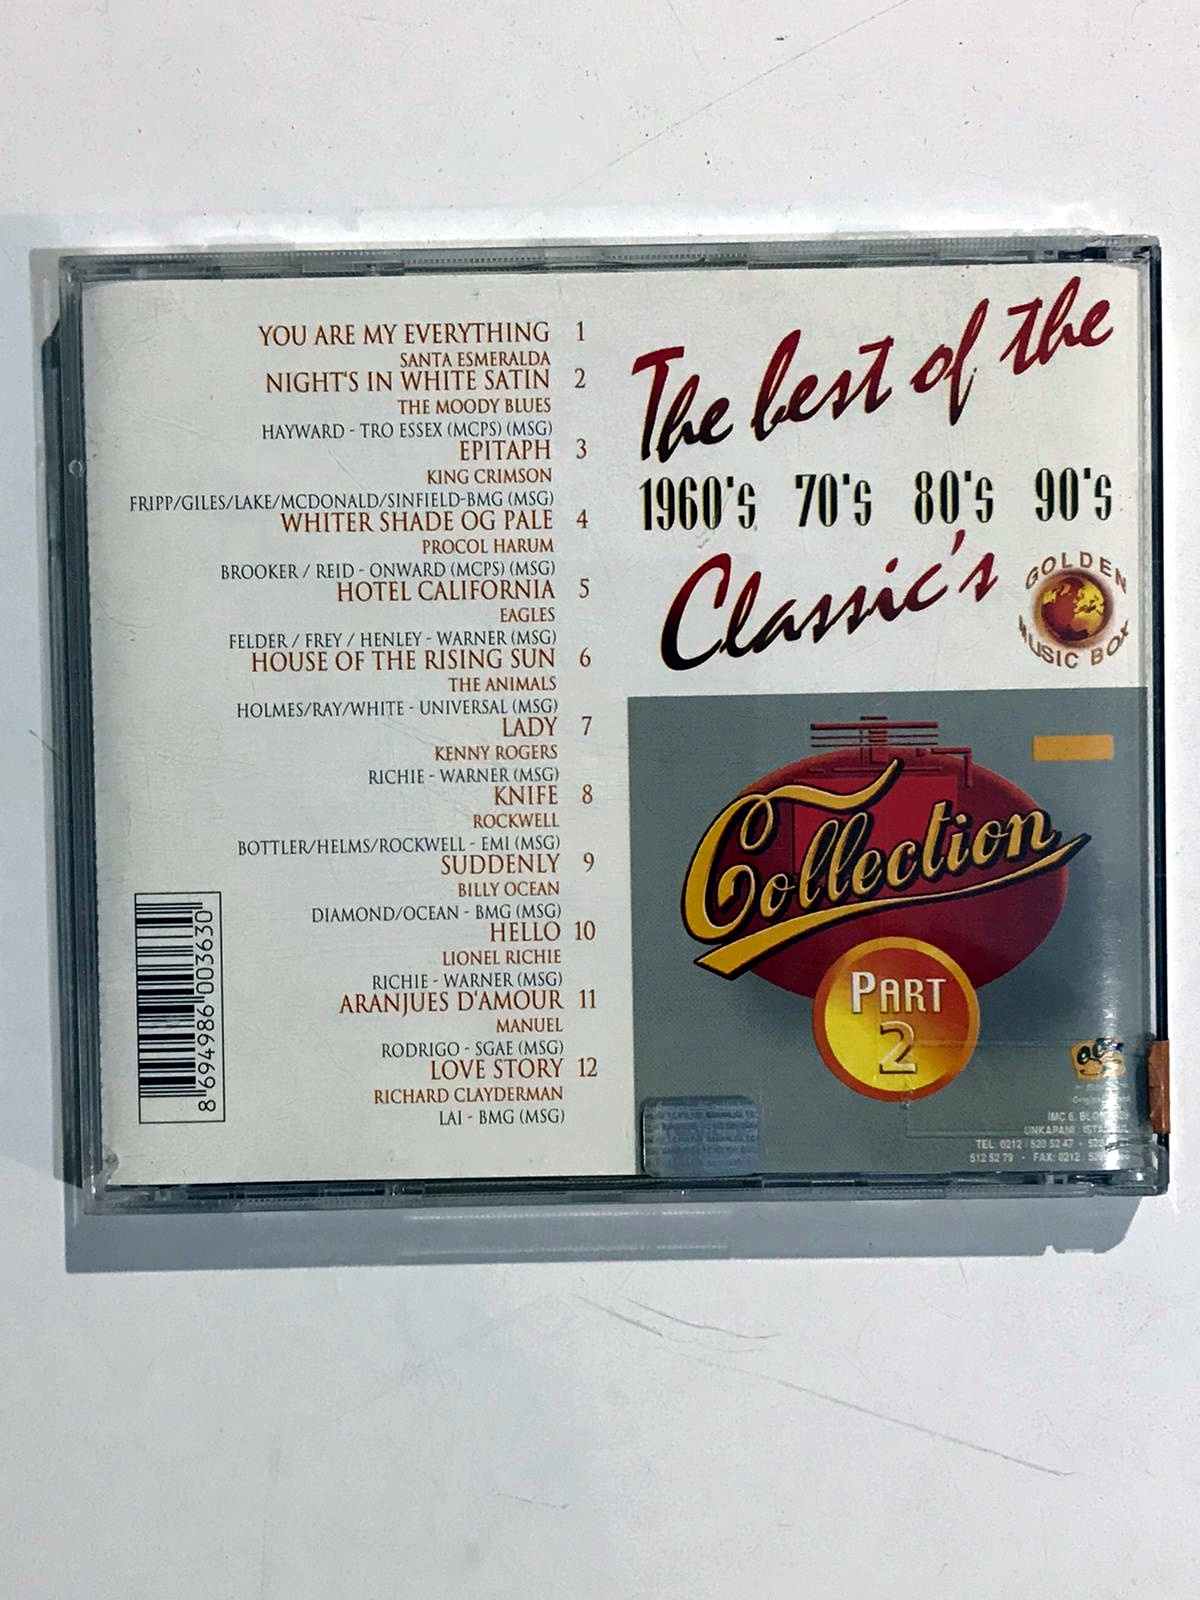  The Best Of The 1960'S 70'S 80'S Classic's Collection / Part 2 - Cd